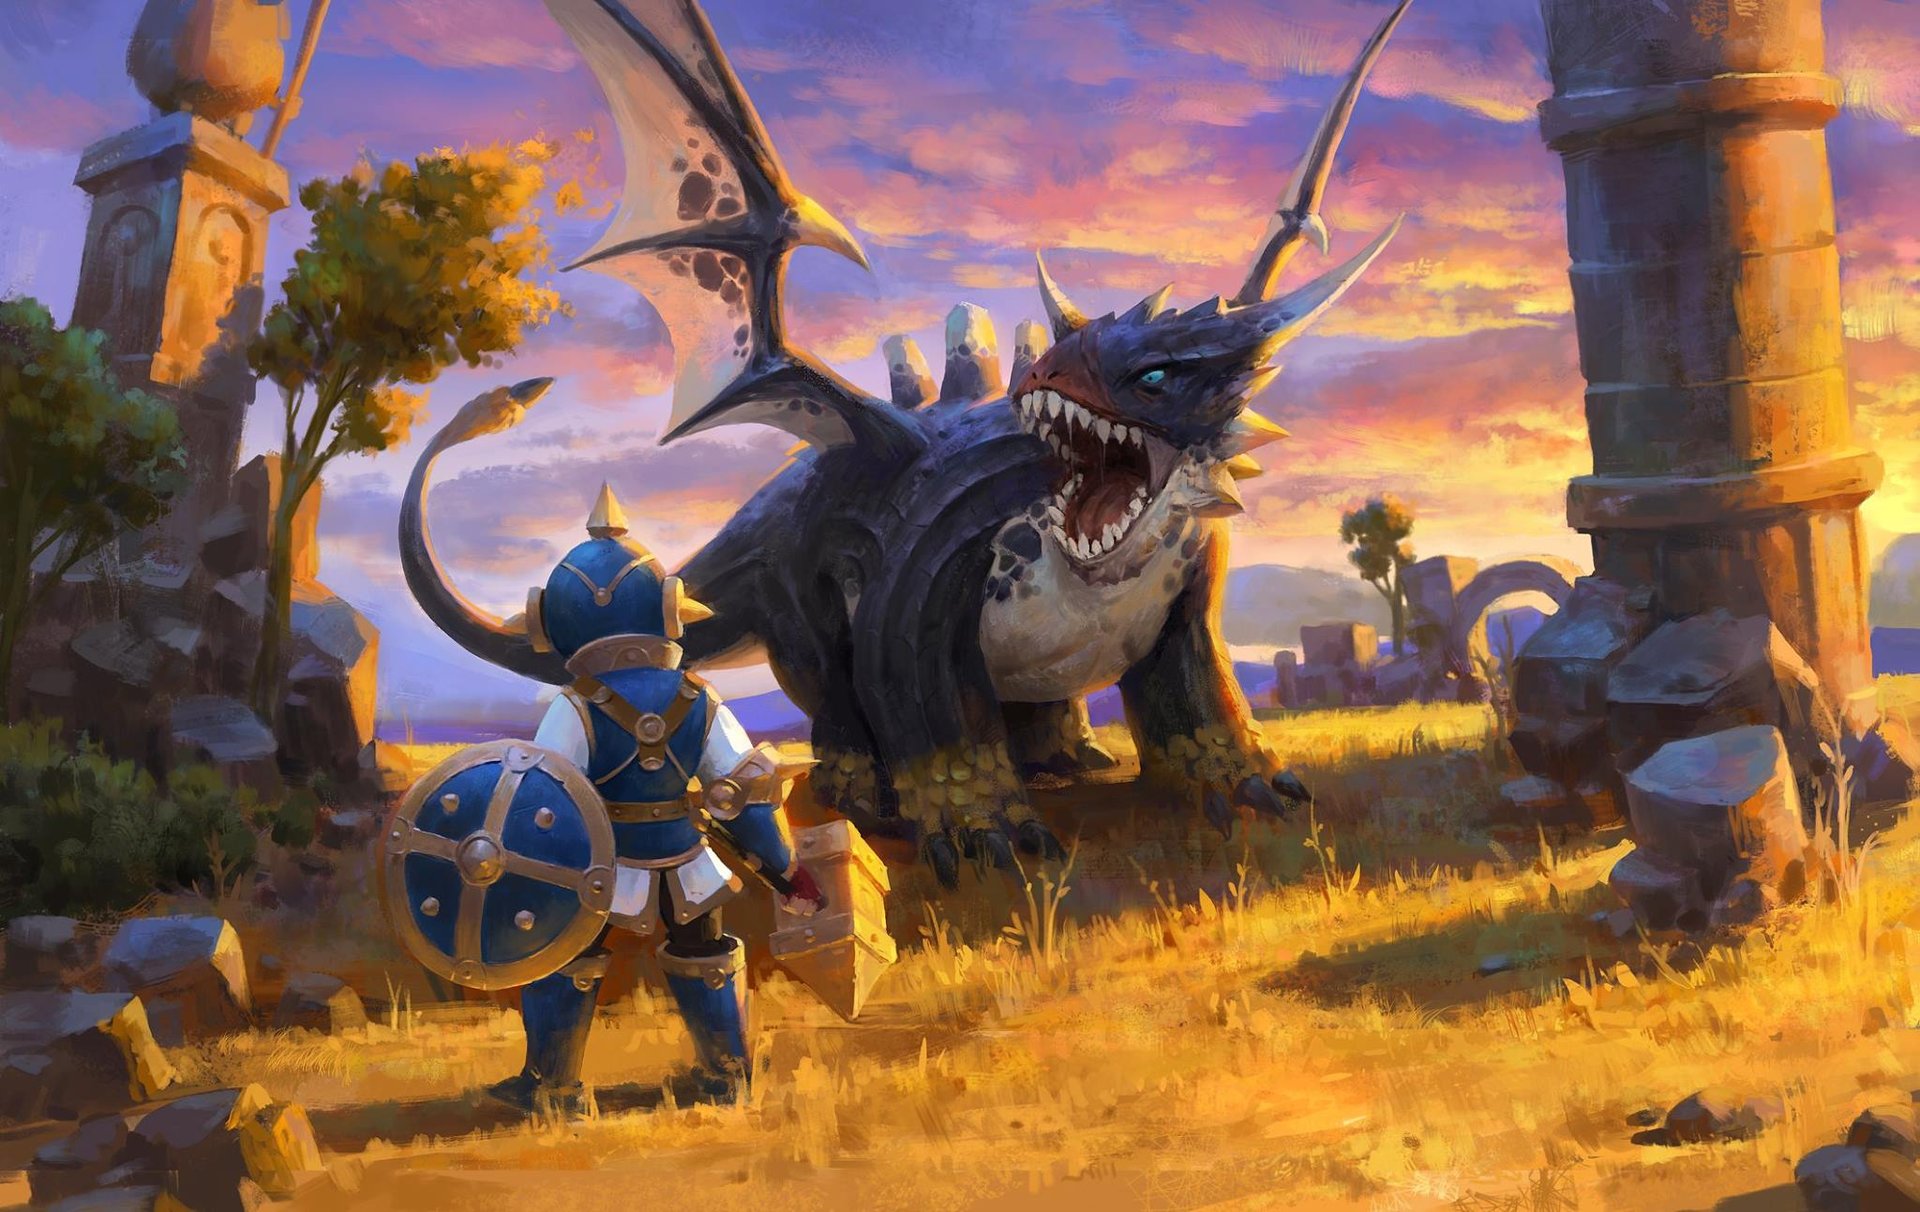 Fine Art: I Wish Monster Hunter Was This Cute